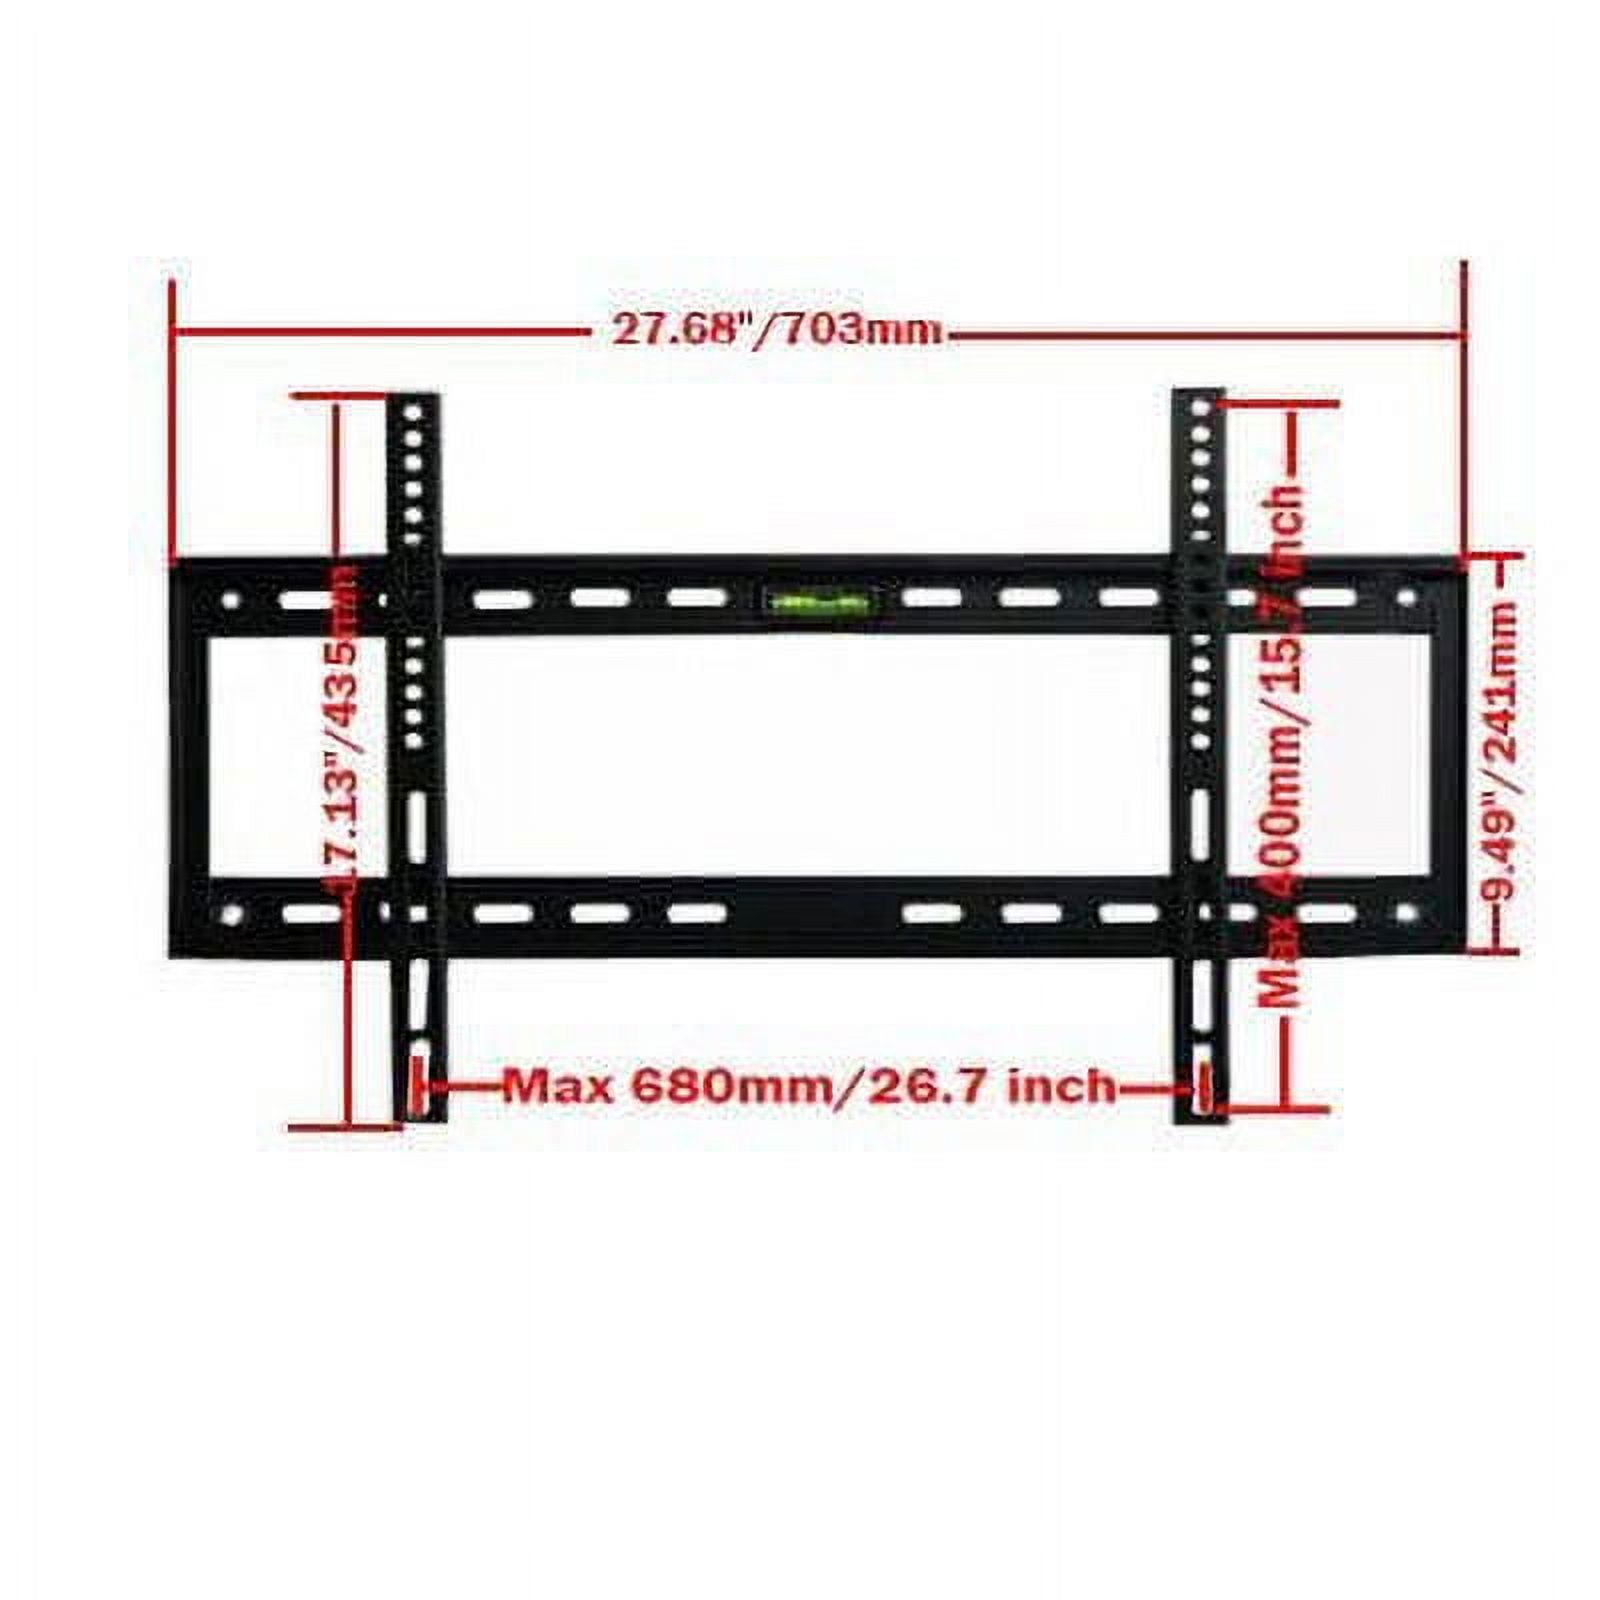 VideoSecu Heavy Duty TV Wall Mount for Sony 40 43 48 49 50 55 60 65 75 Inch XBR-49X800E XBR-55A1E XBR-55X930D XBR-55X930E XBR-65A1E XBR-65X850E LED LCD Plasma Flat Panel Screen HDTV Display MN7 - image 3 of 3